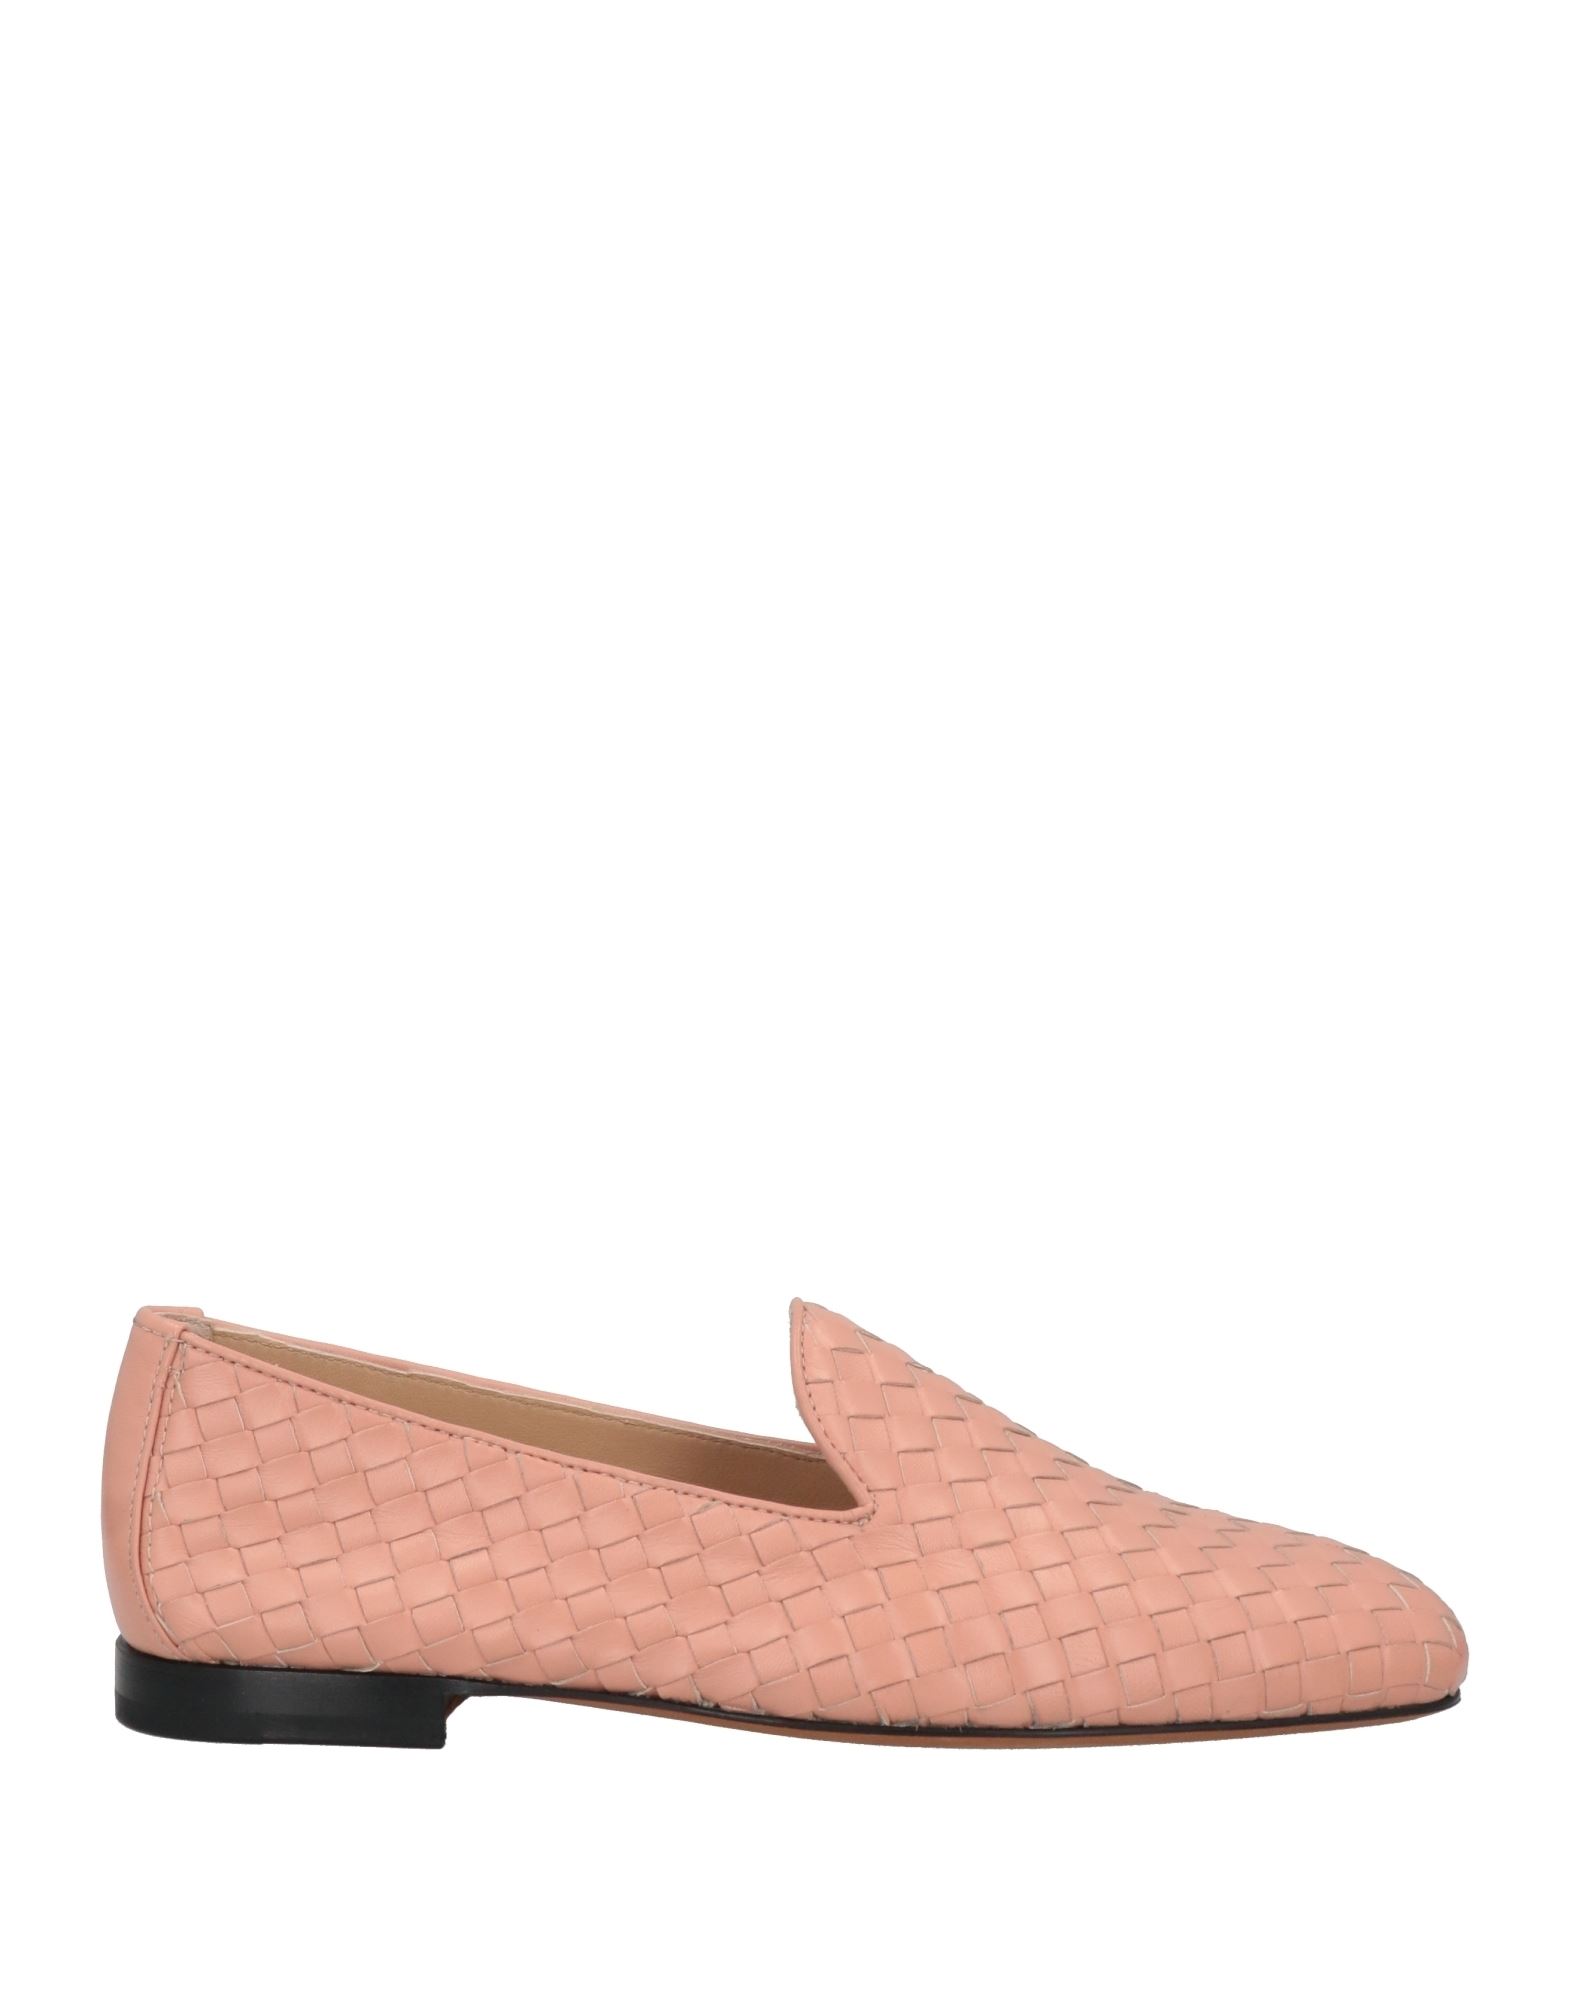 Doucal's Woman Loafers Blush Size 8 Soft Leather In Pink